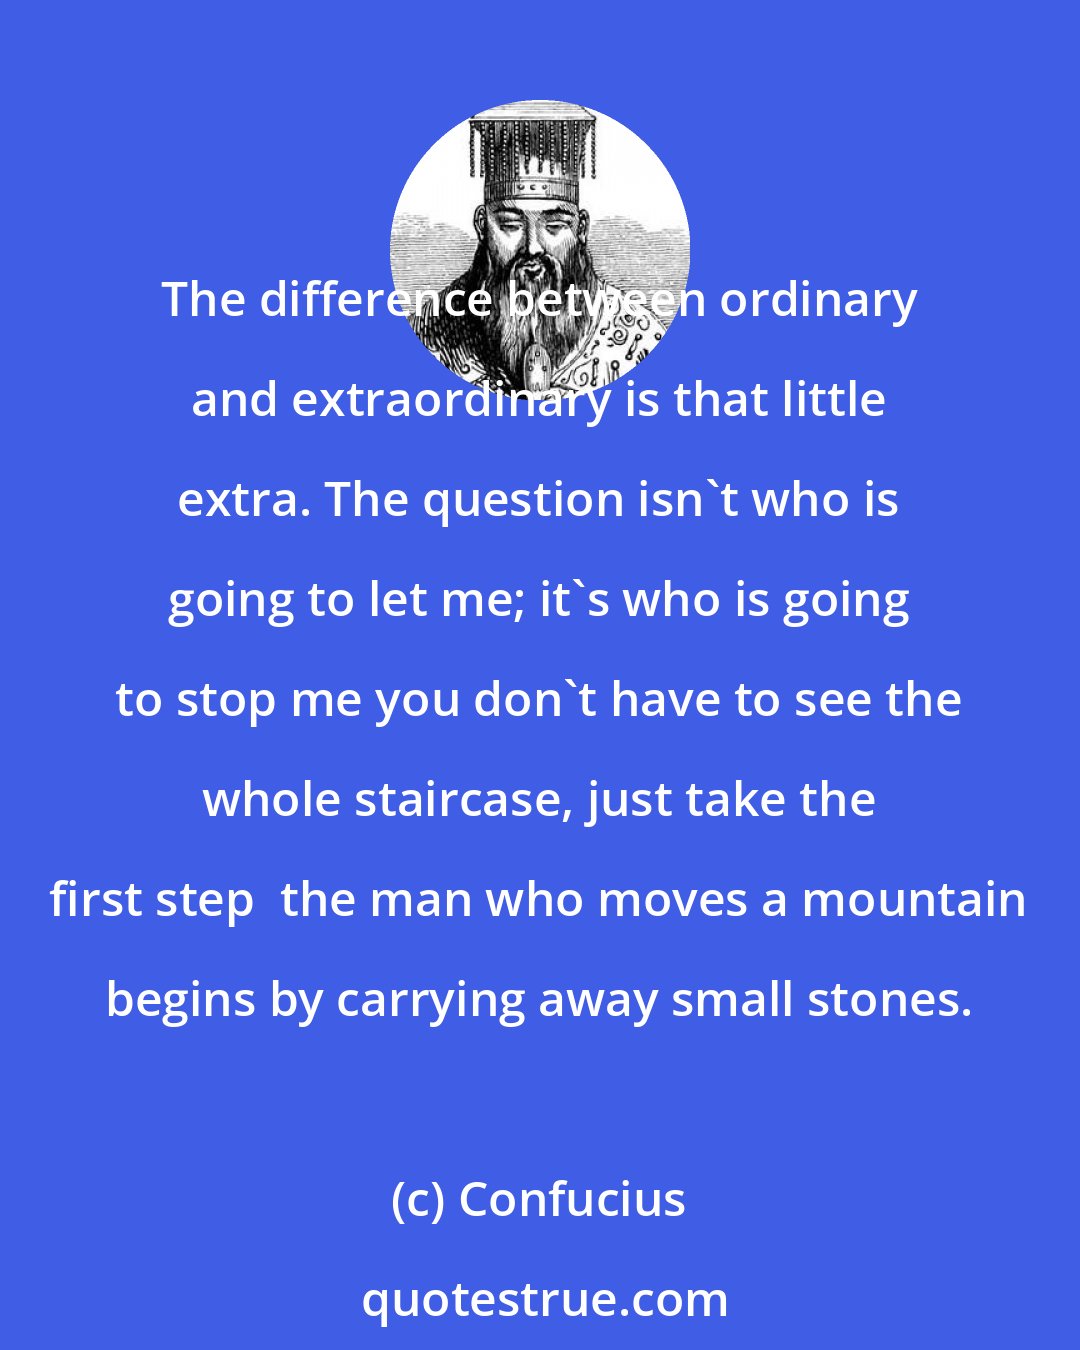 Confucius: The difference between ordinary and extraordinary is that little extra. The question isn't who is going to let me; it's who is going to stop me you don't have to see the whole staircase, just take the first step  the man who moves a mountain begins by carrying away small stones.